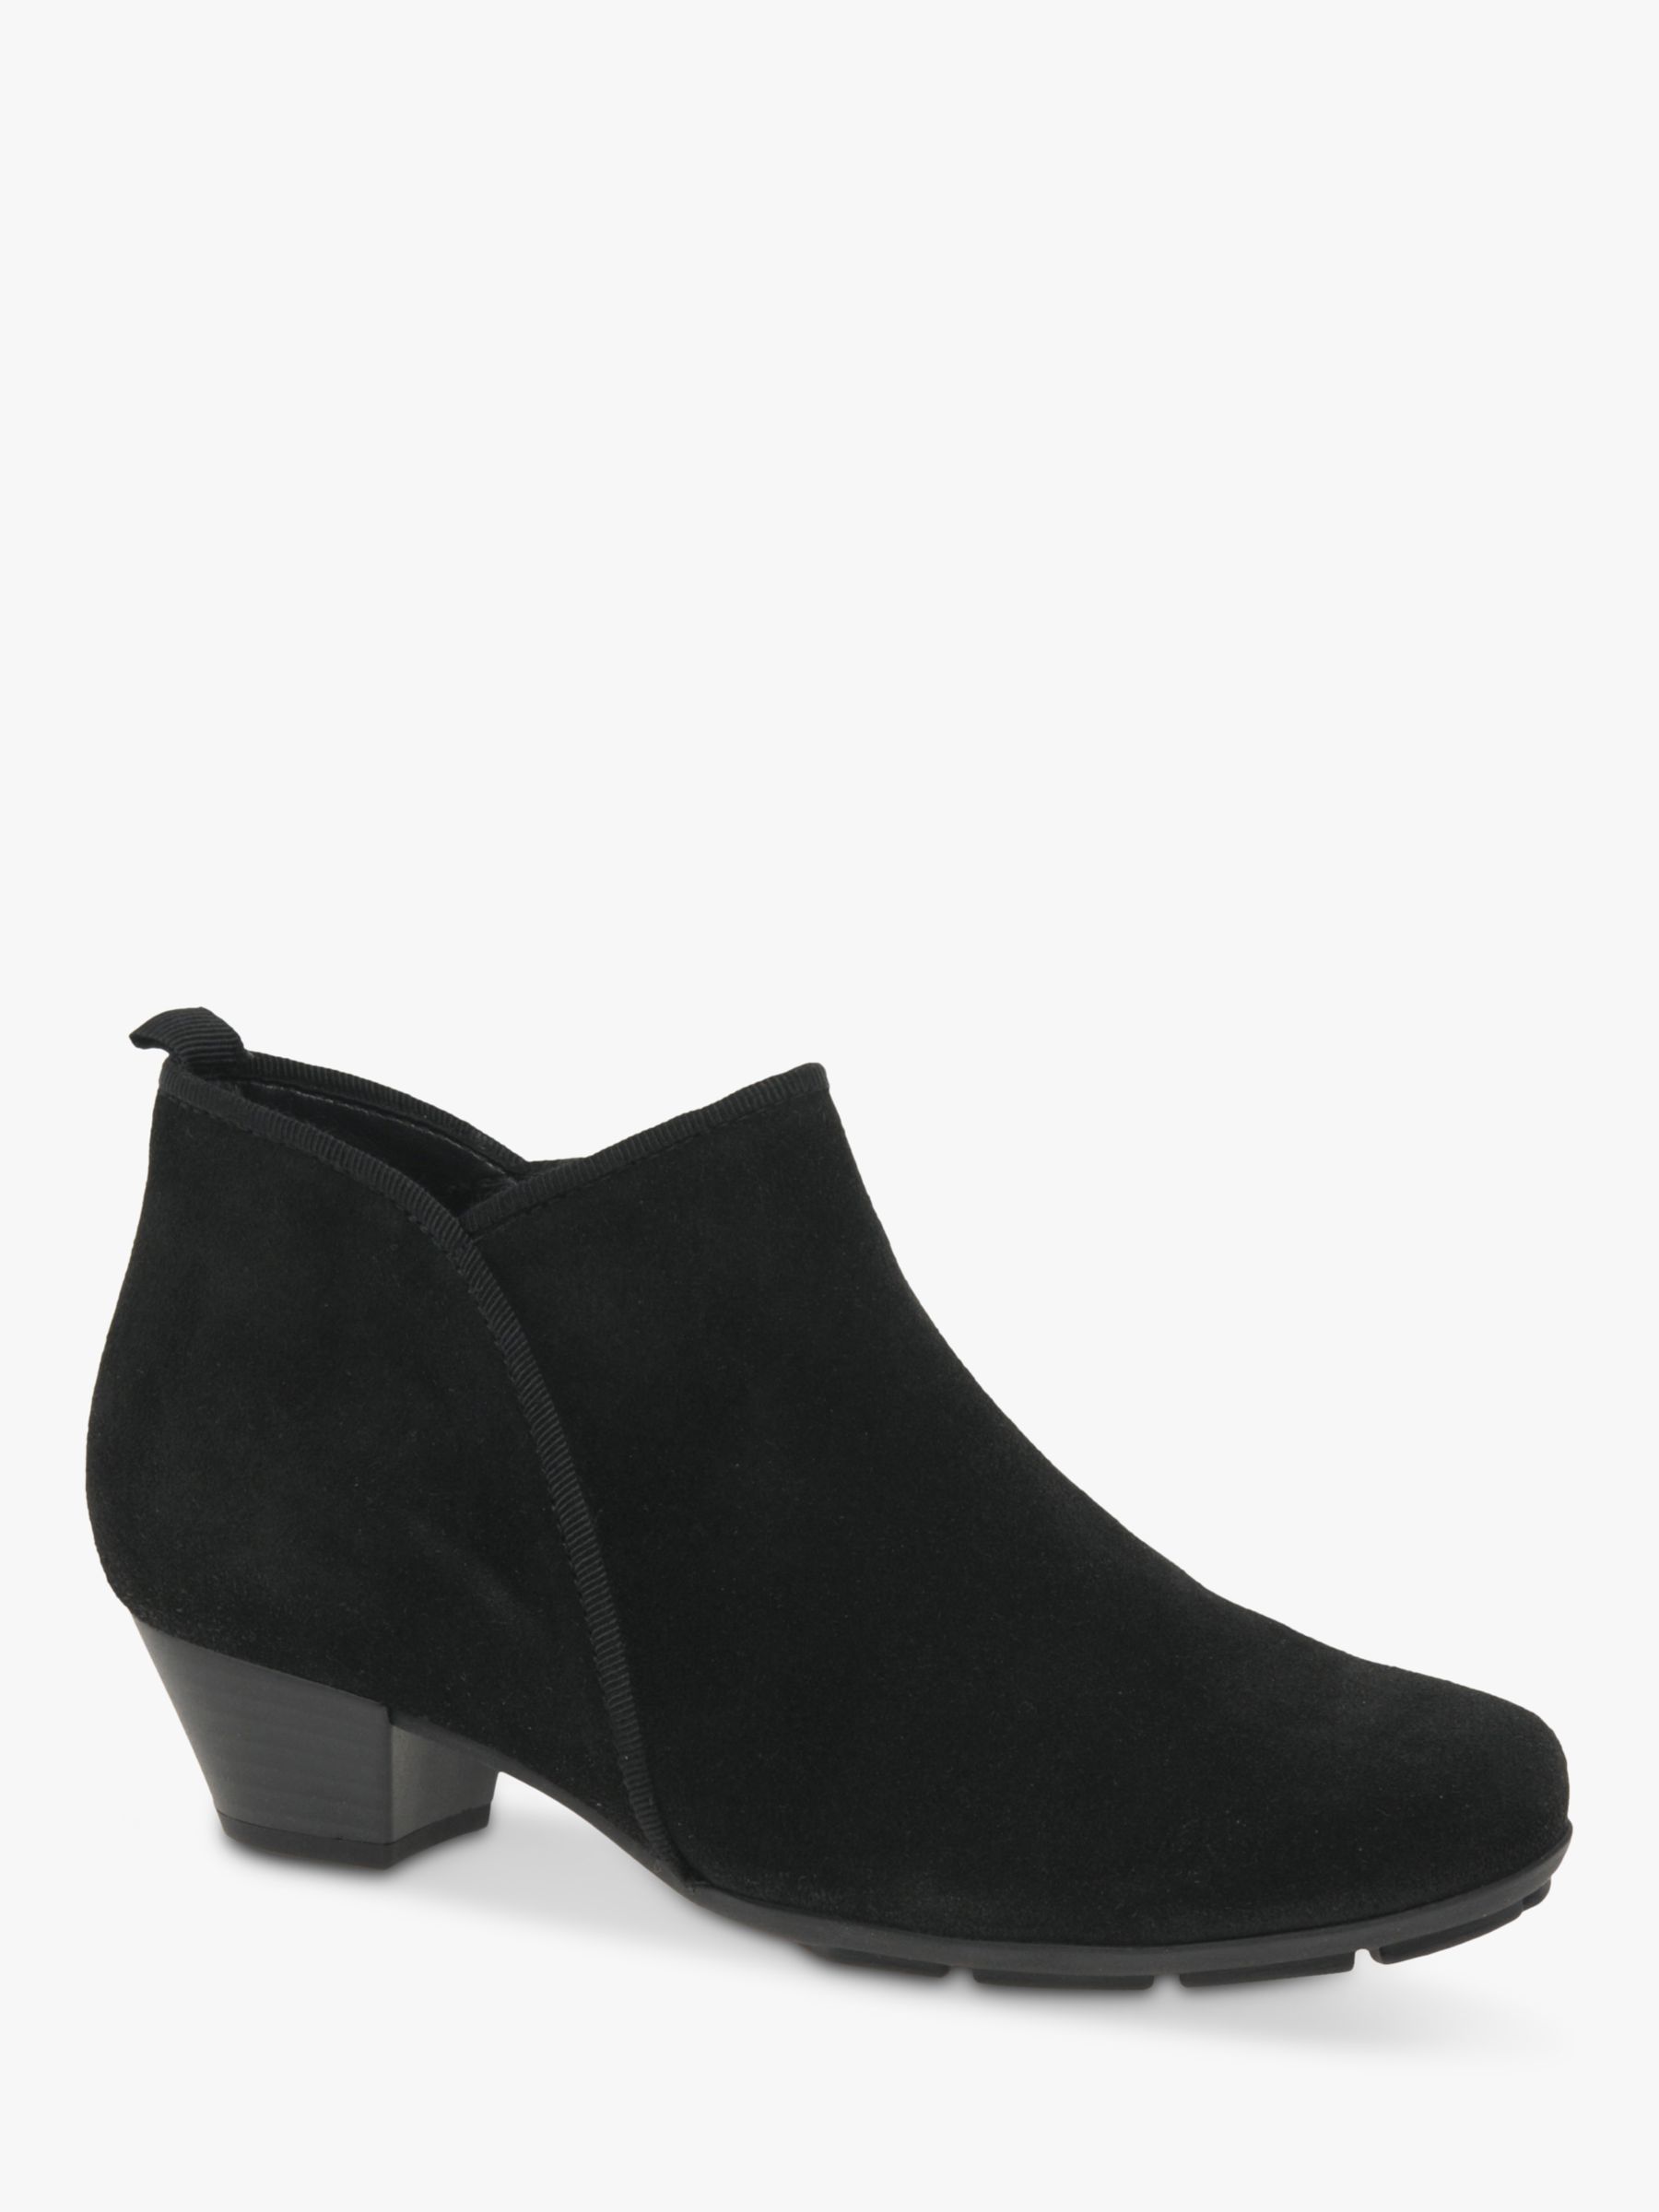 Gabor Trudy Suede Ankle Boots, Black at Lewis Partners